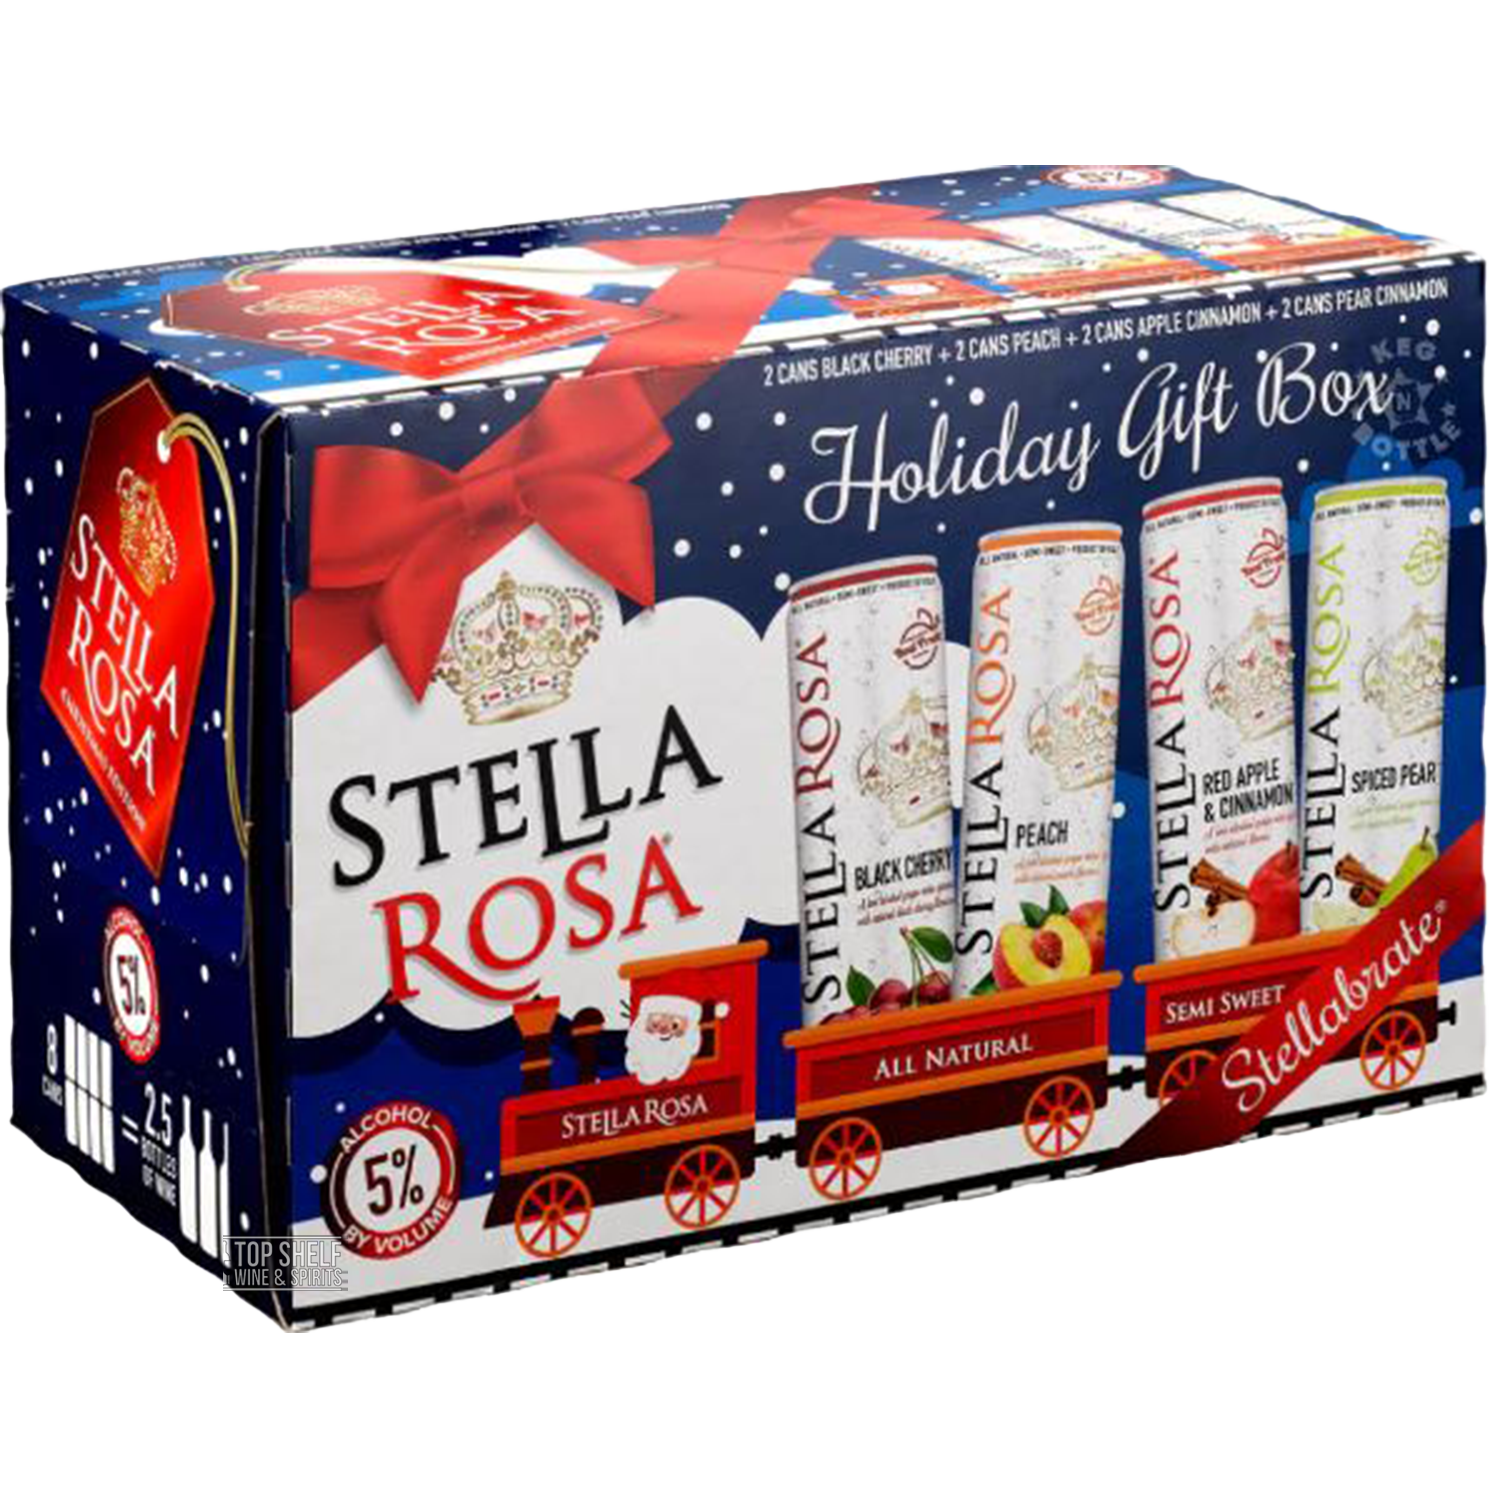 Stella Rosa Holiday Gift Pack (8 Pack Cans)